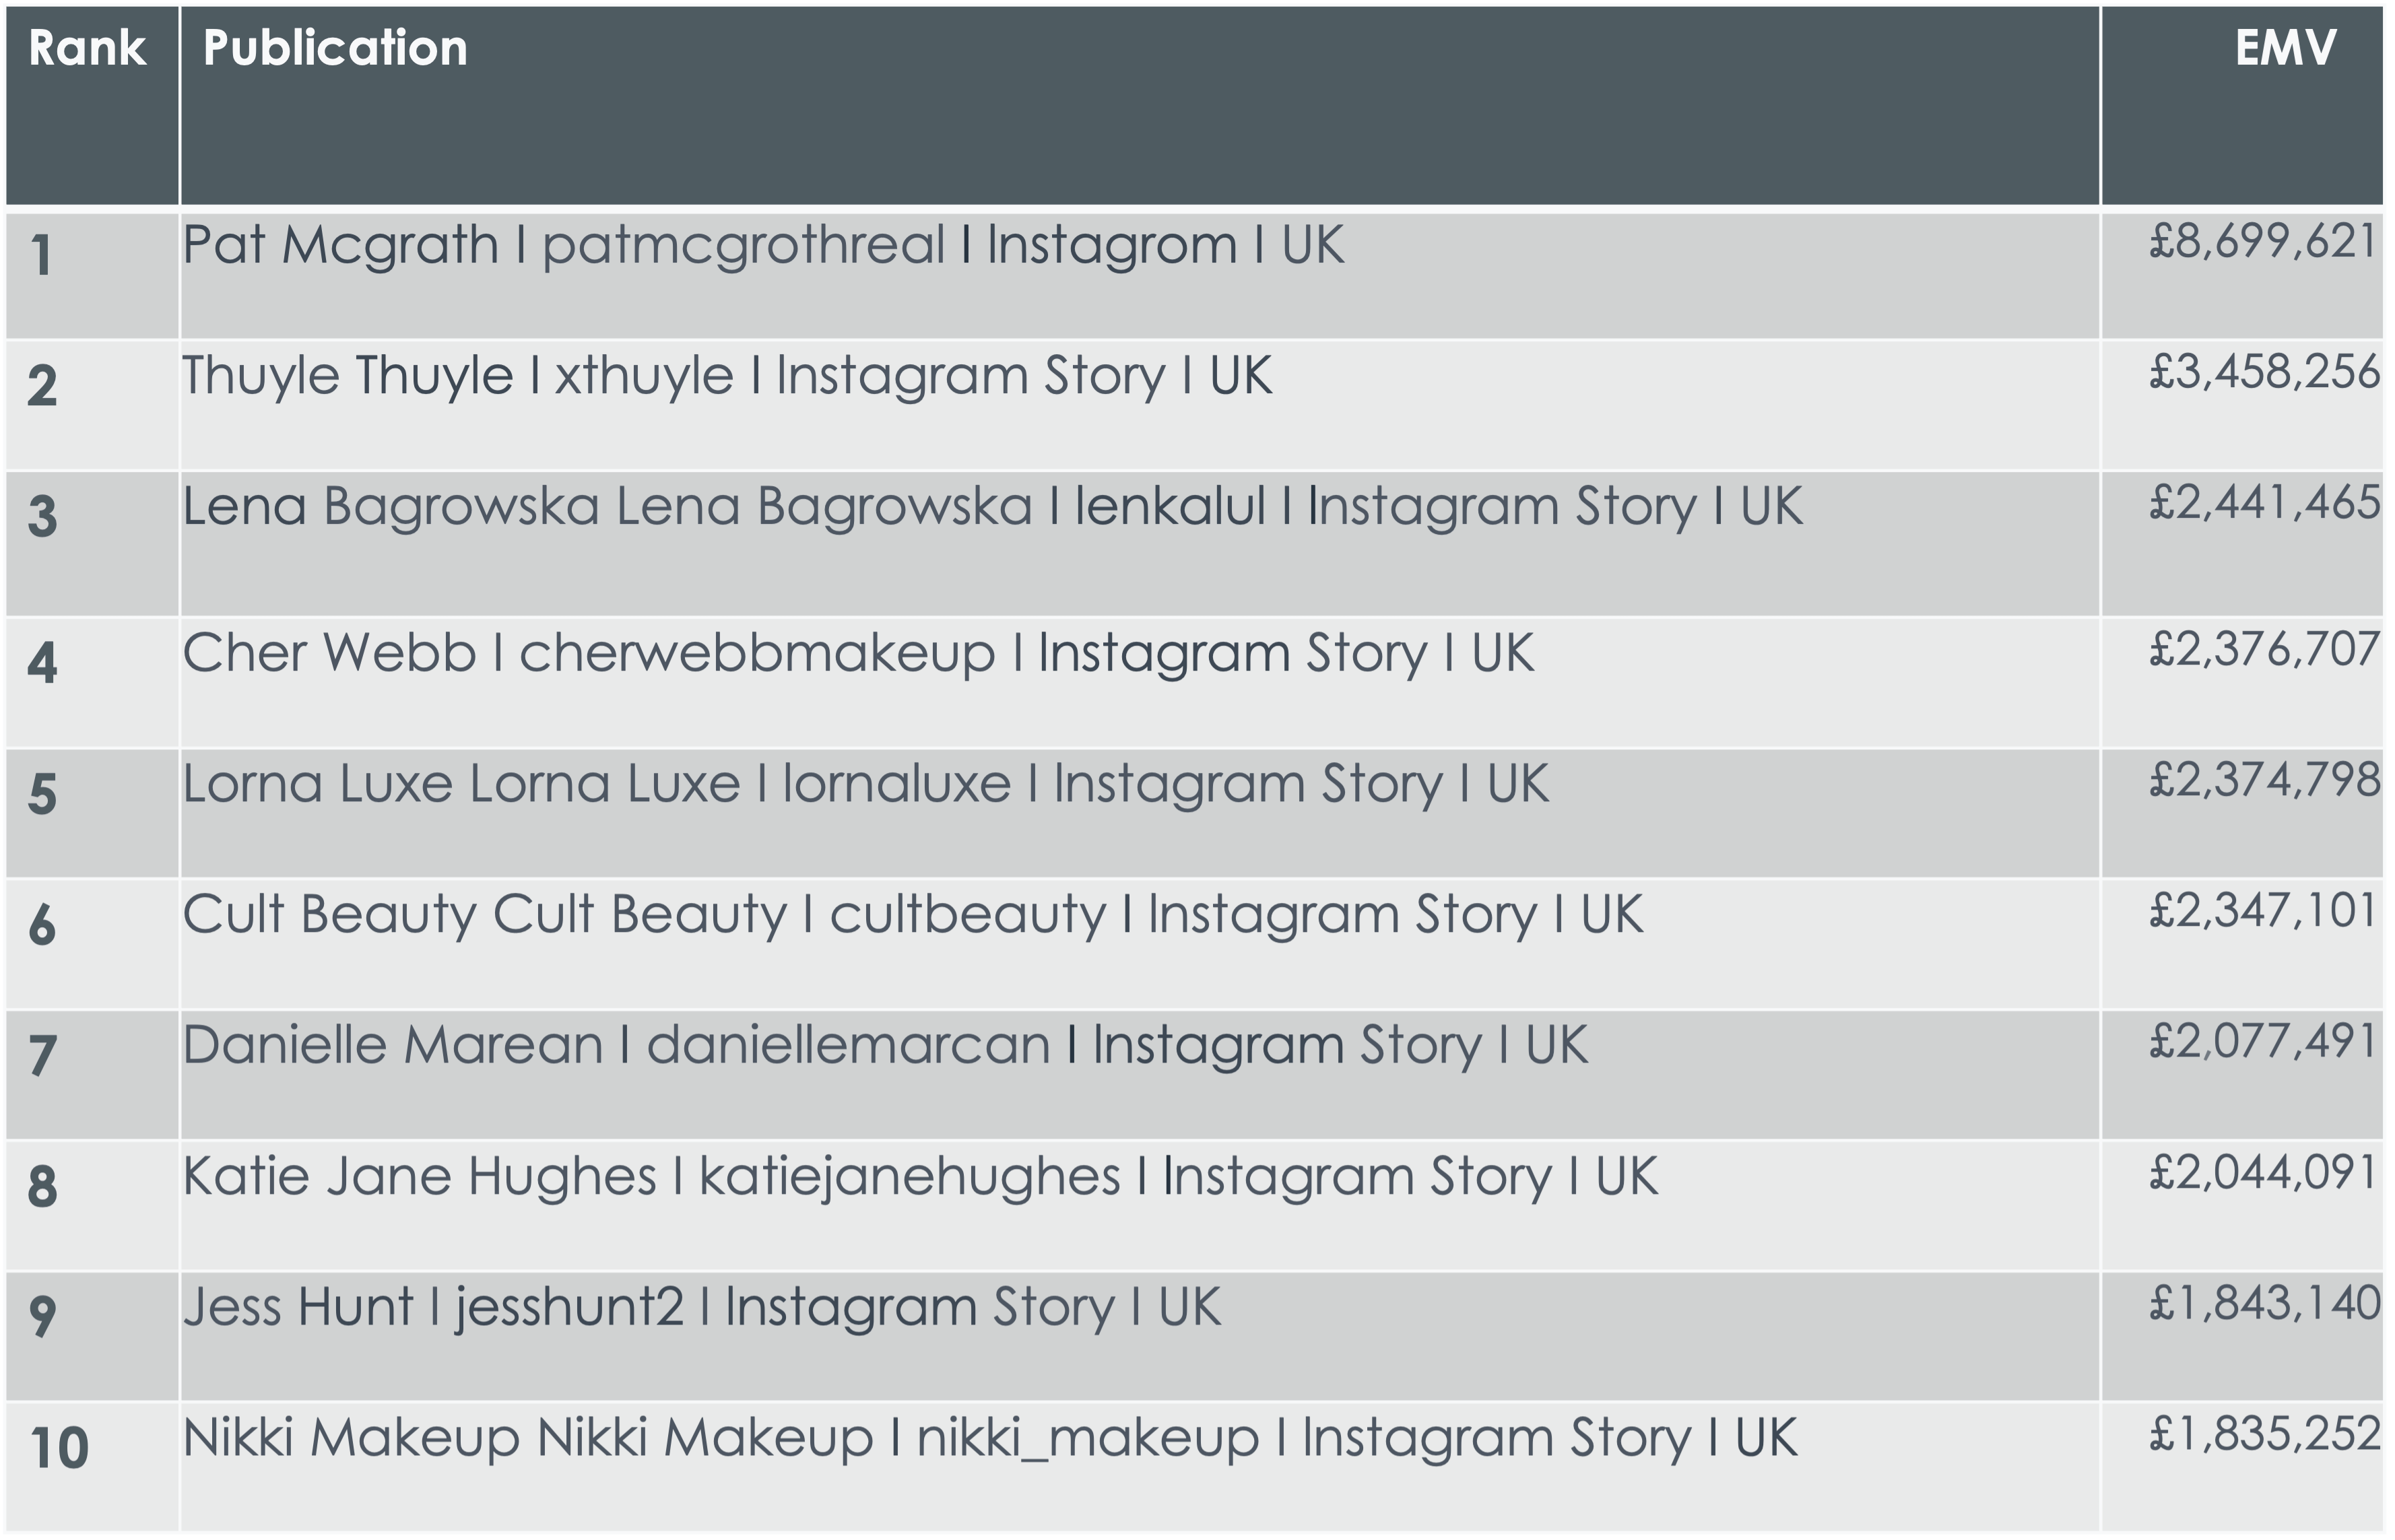 Q1 2022 - The top 10 UK beauty influencers by EMV